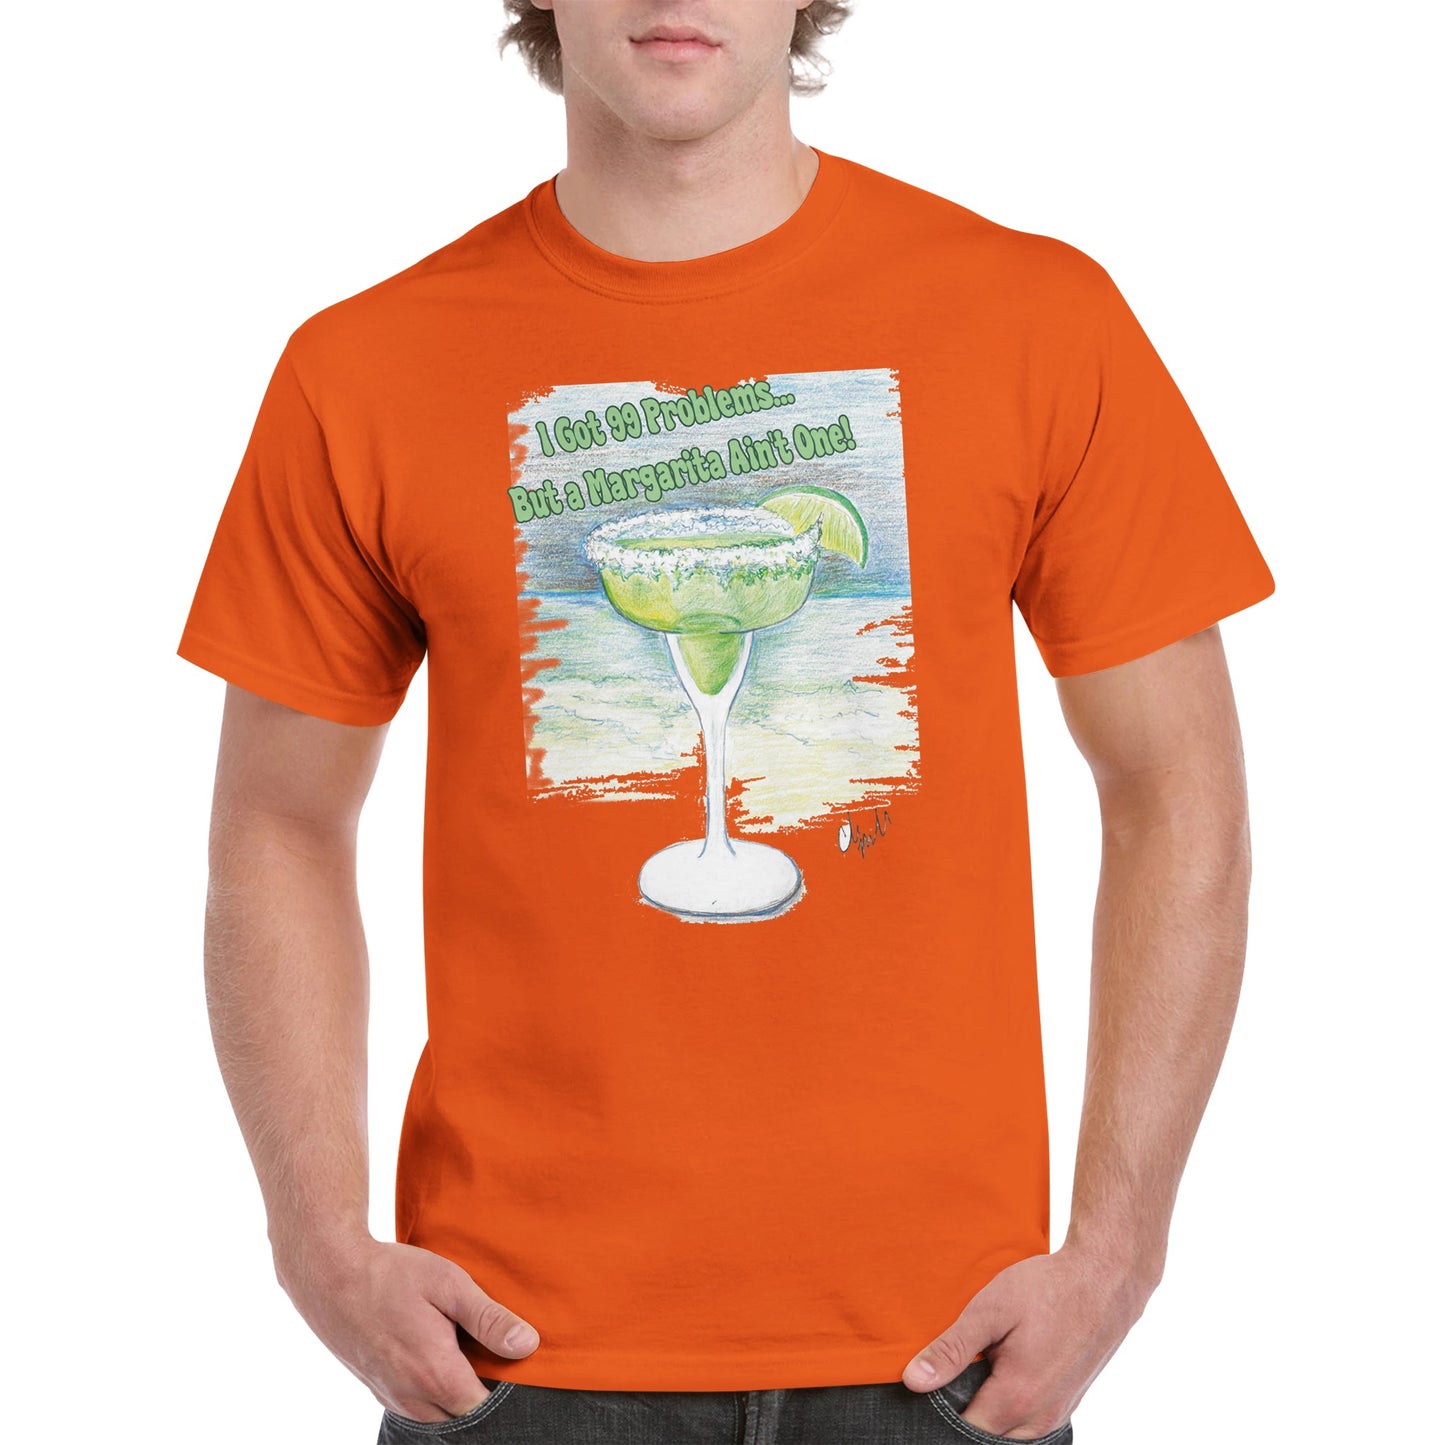 A orange heavyweight Unisex Crewneck cotton t-shirt with original artwork I Got 99 Problems… But A Margarita Ain’t One! on the front from WhatYa Say Apparel worn by blonde-haired male front view.